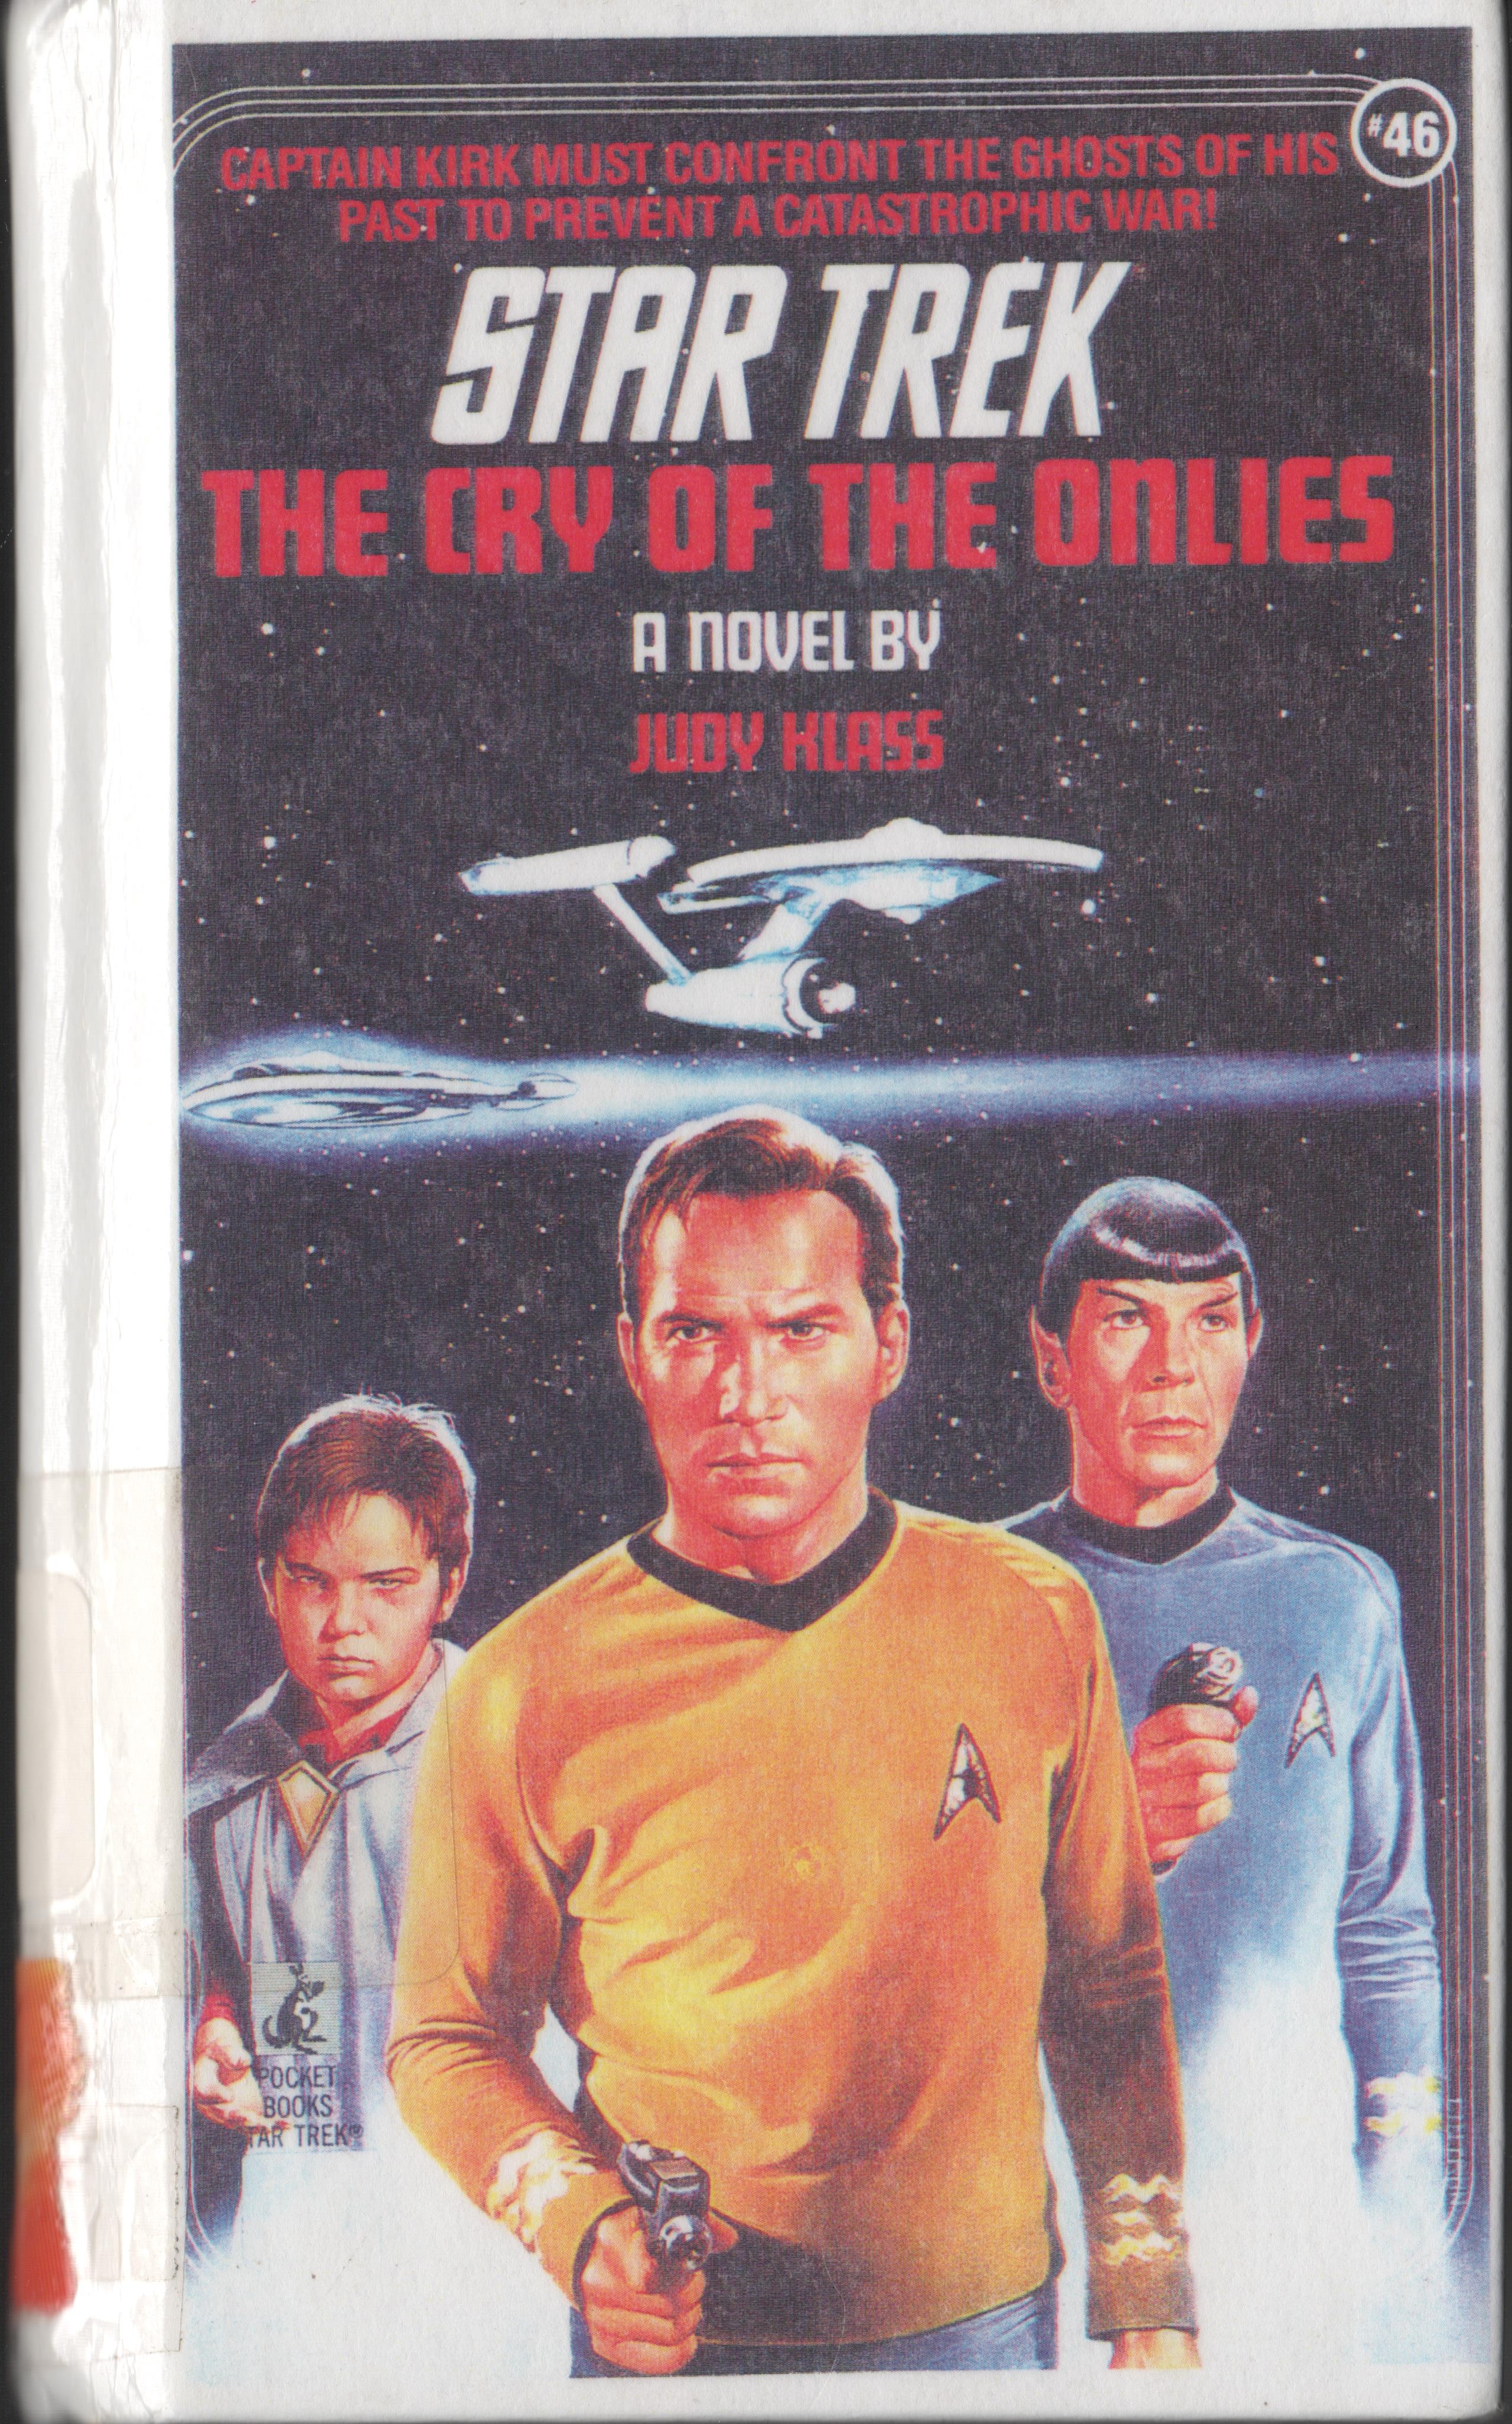 Star Trek 46 The Cry of the Onlies Library Edition